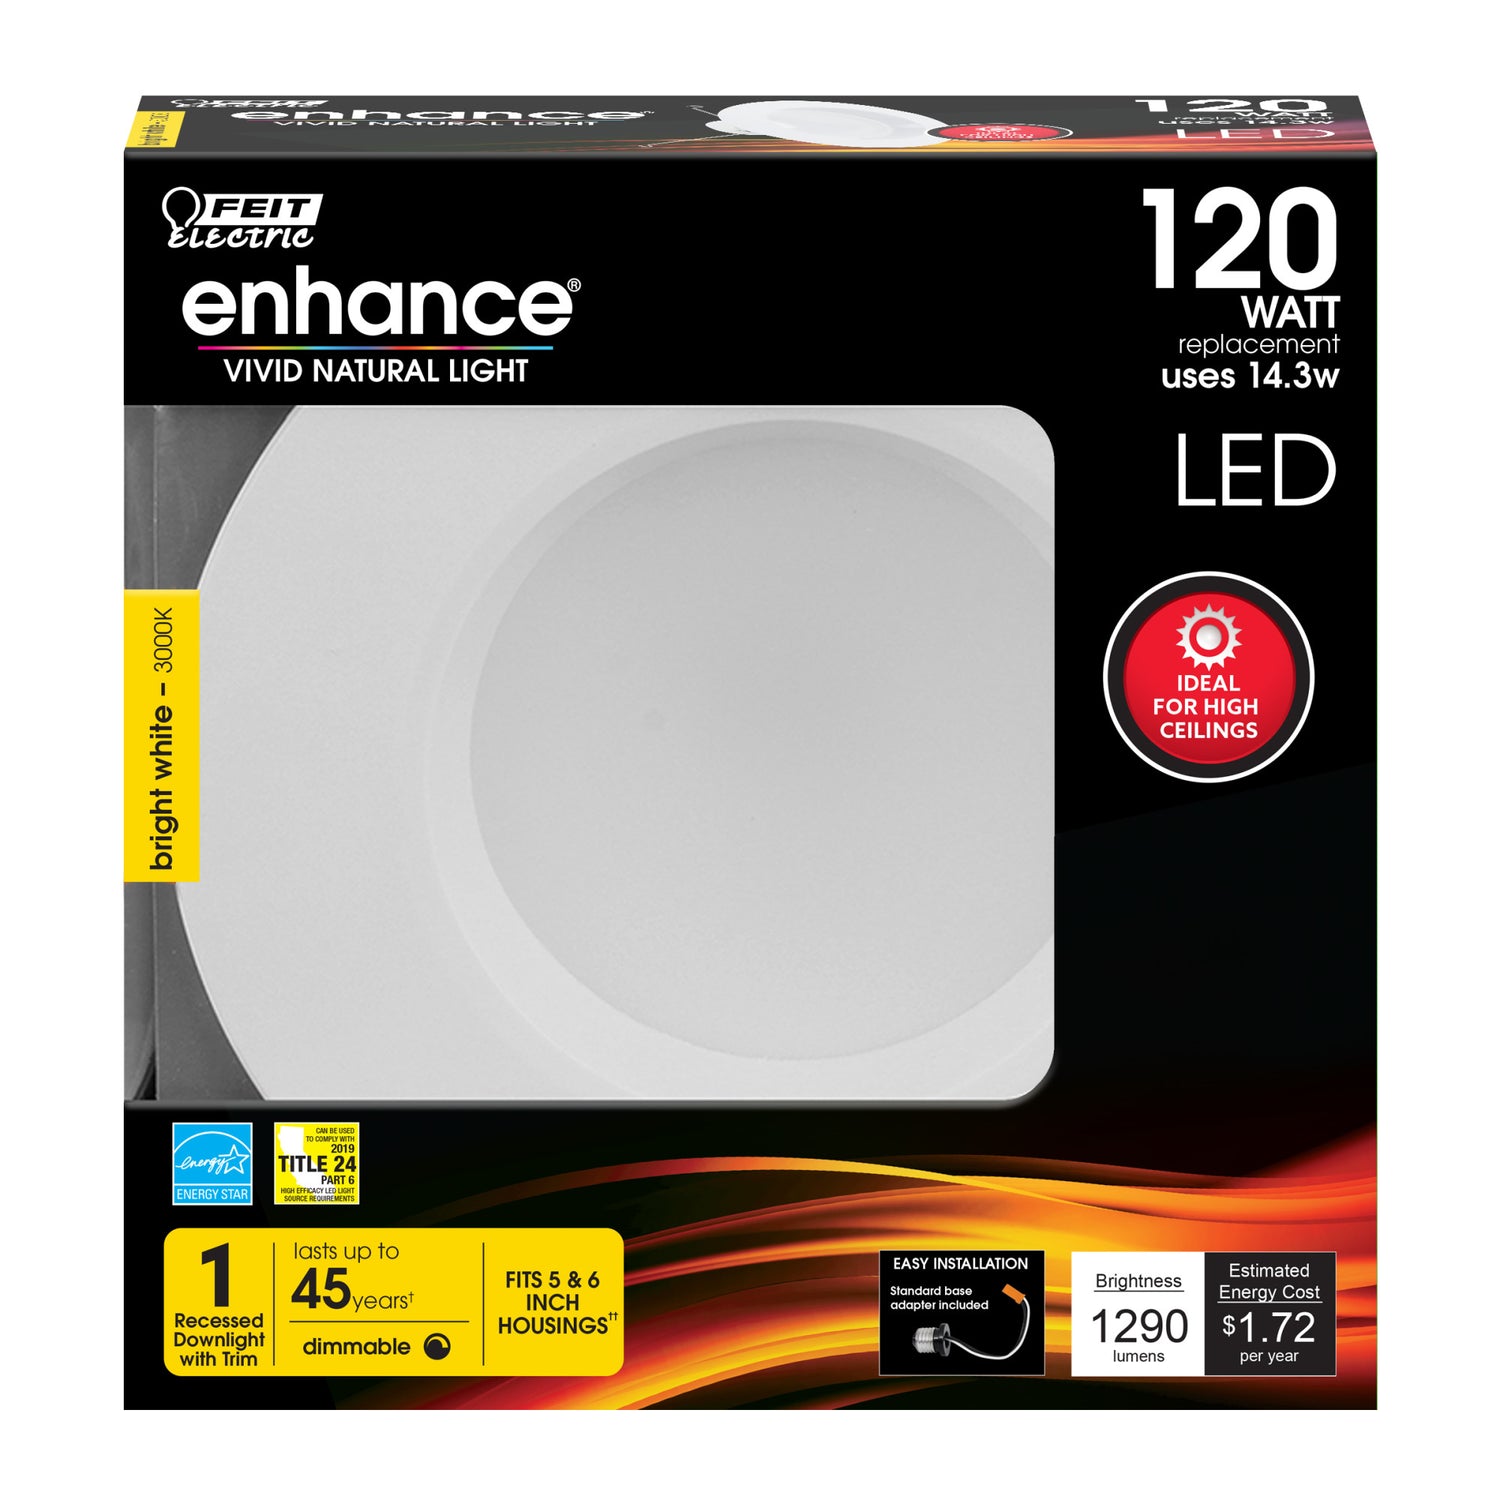 5-6 in. 14.3W (120W Replacement) Bright White (3000K) High Output LED Recessed Downlight